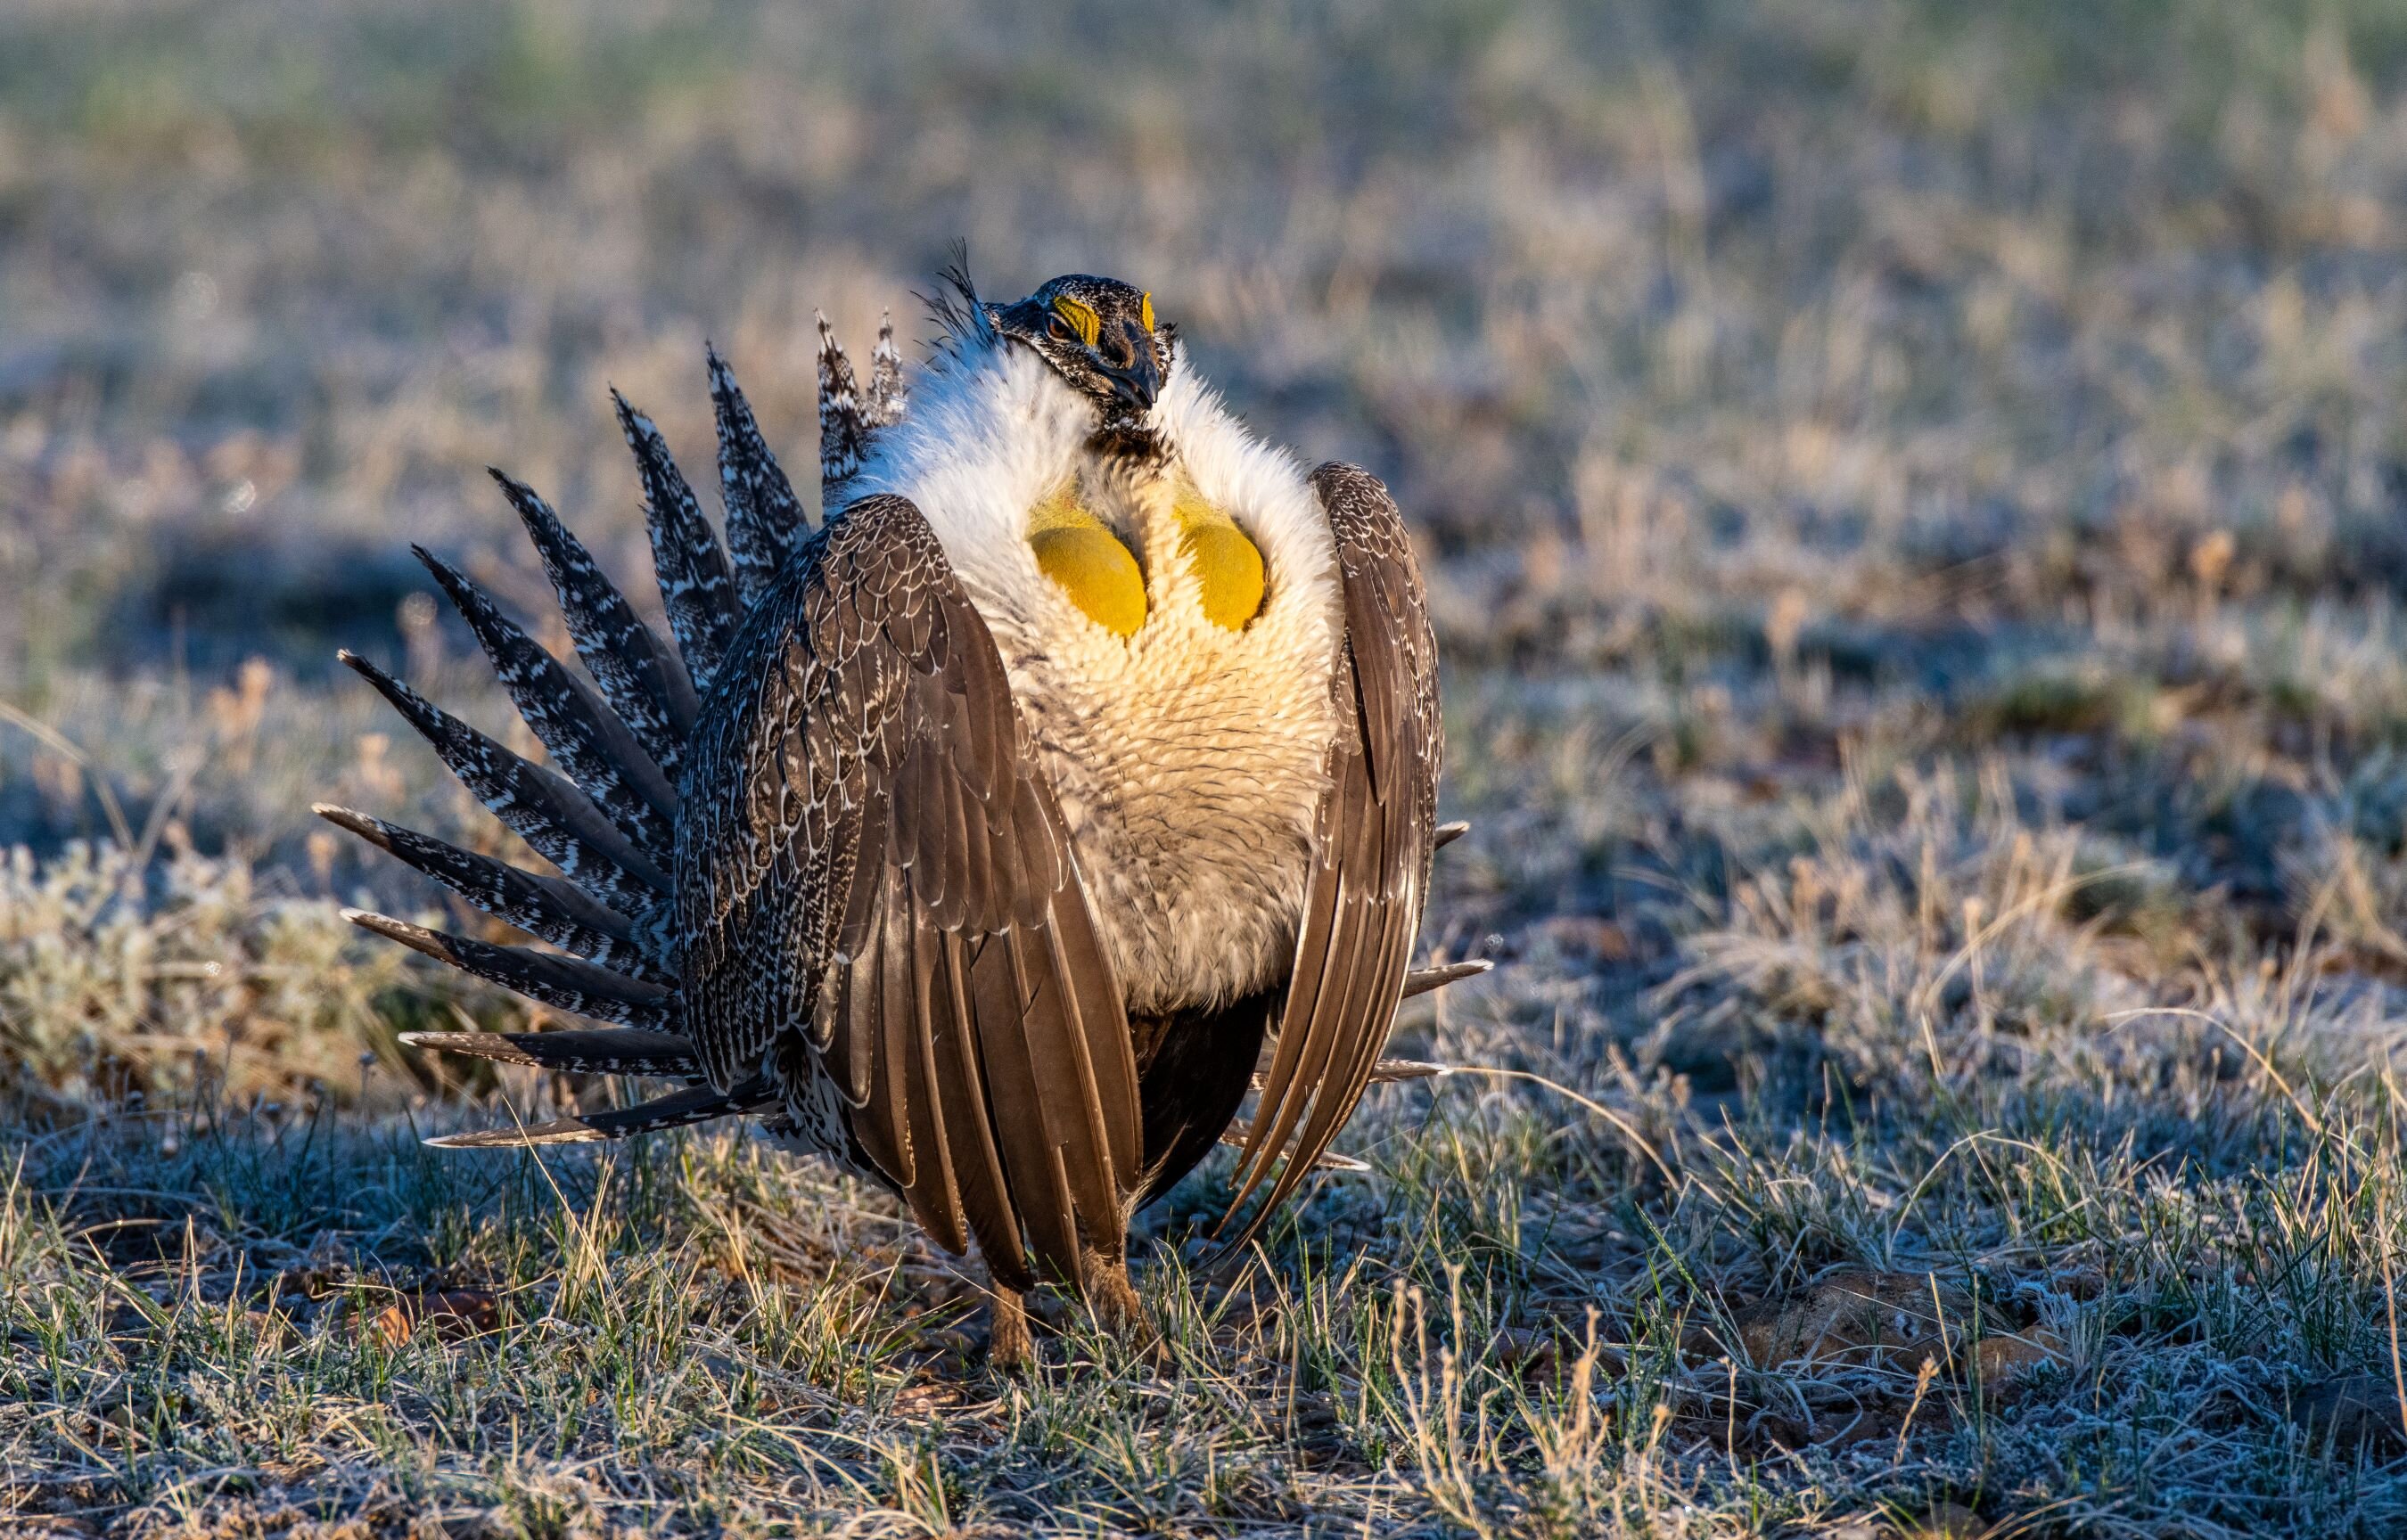 Strategic grazing could boost conservation of 'near-threatened' sage-grouse